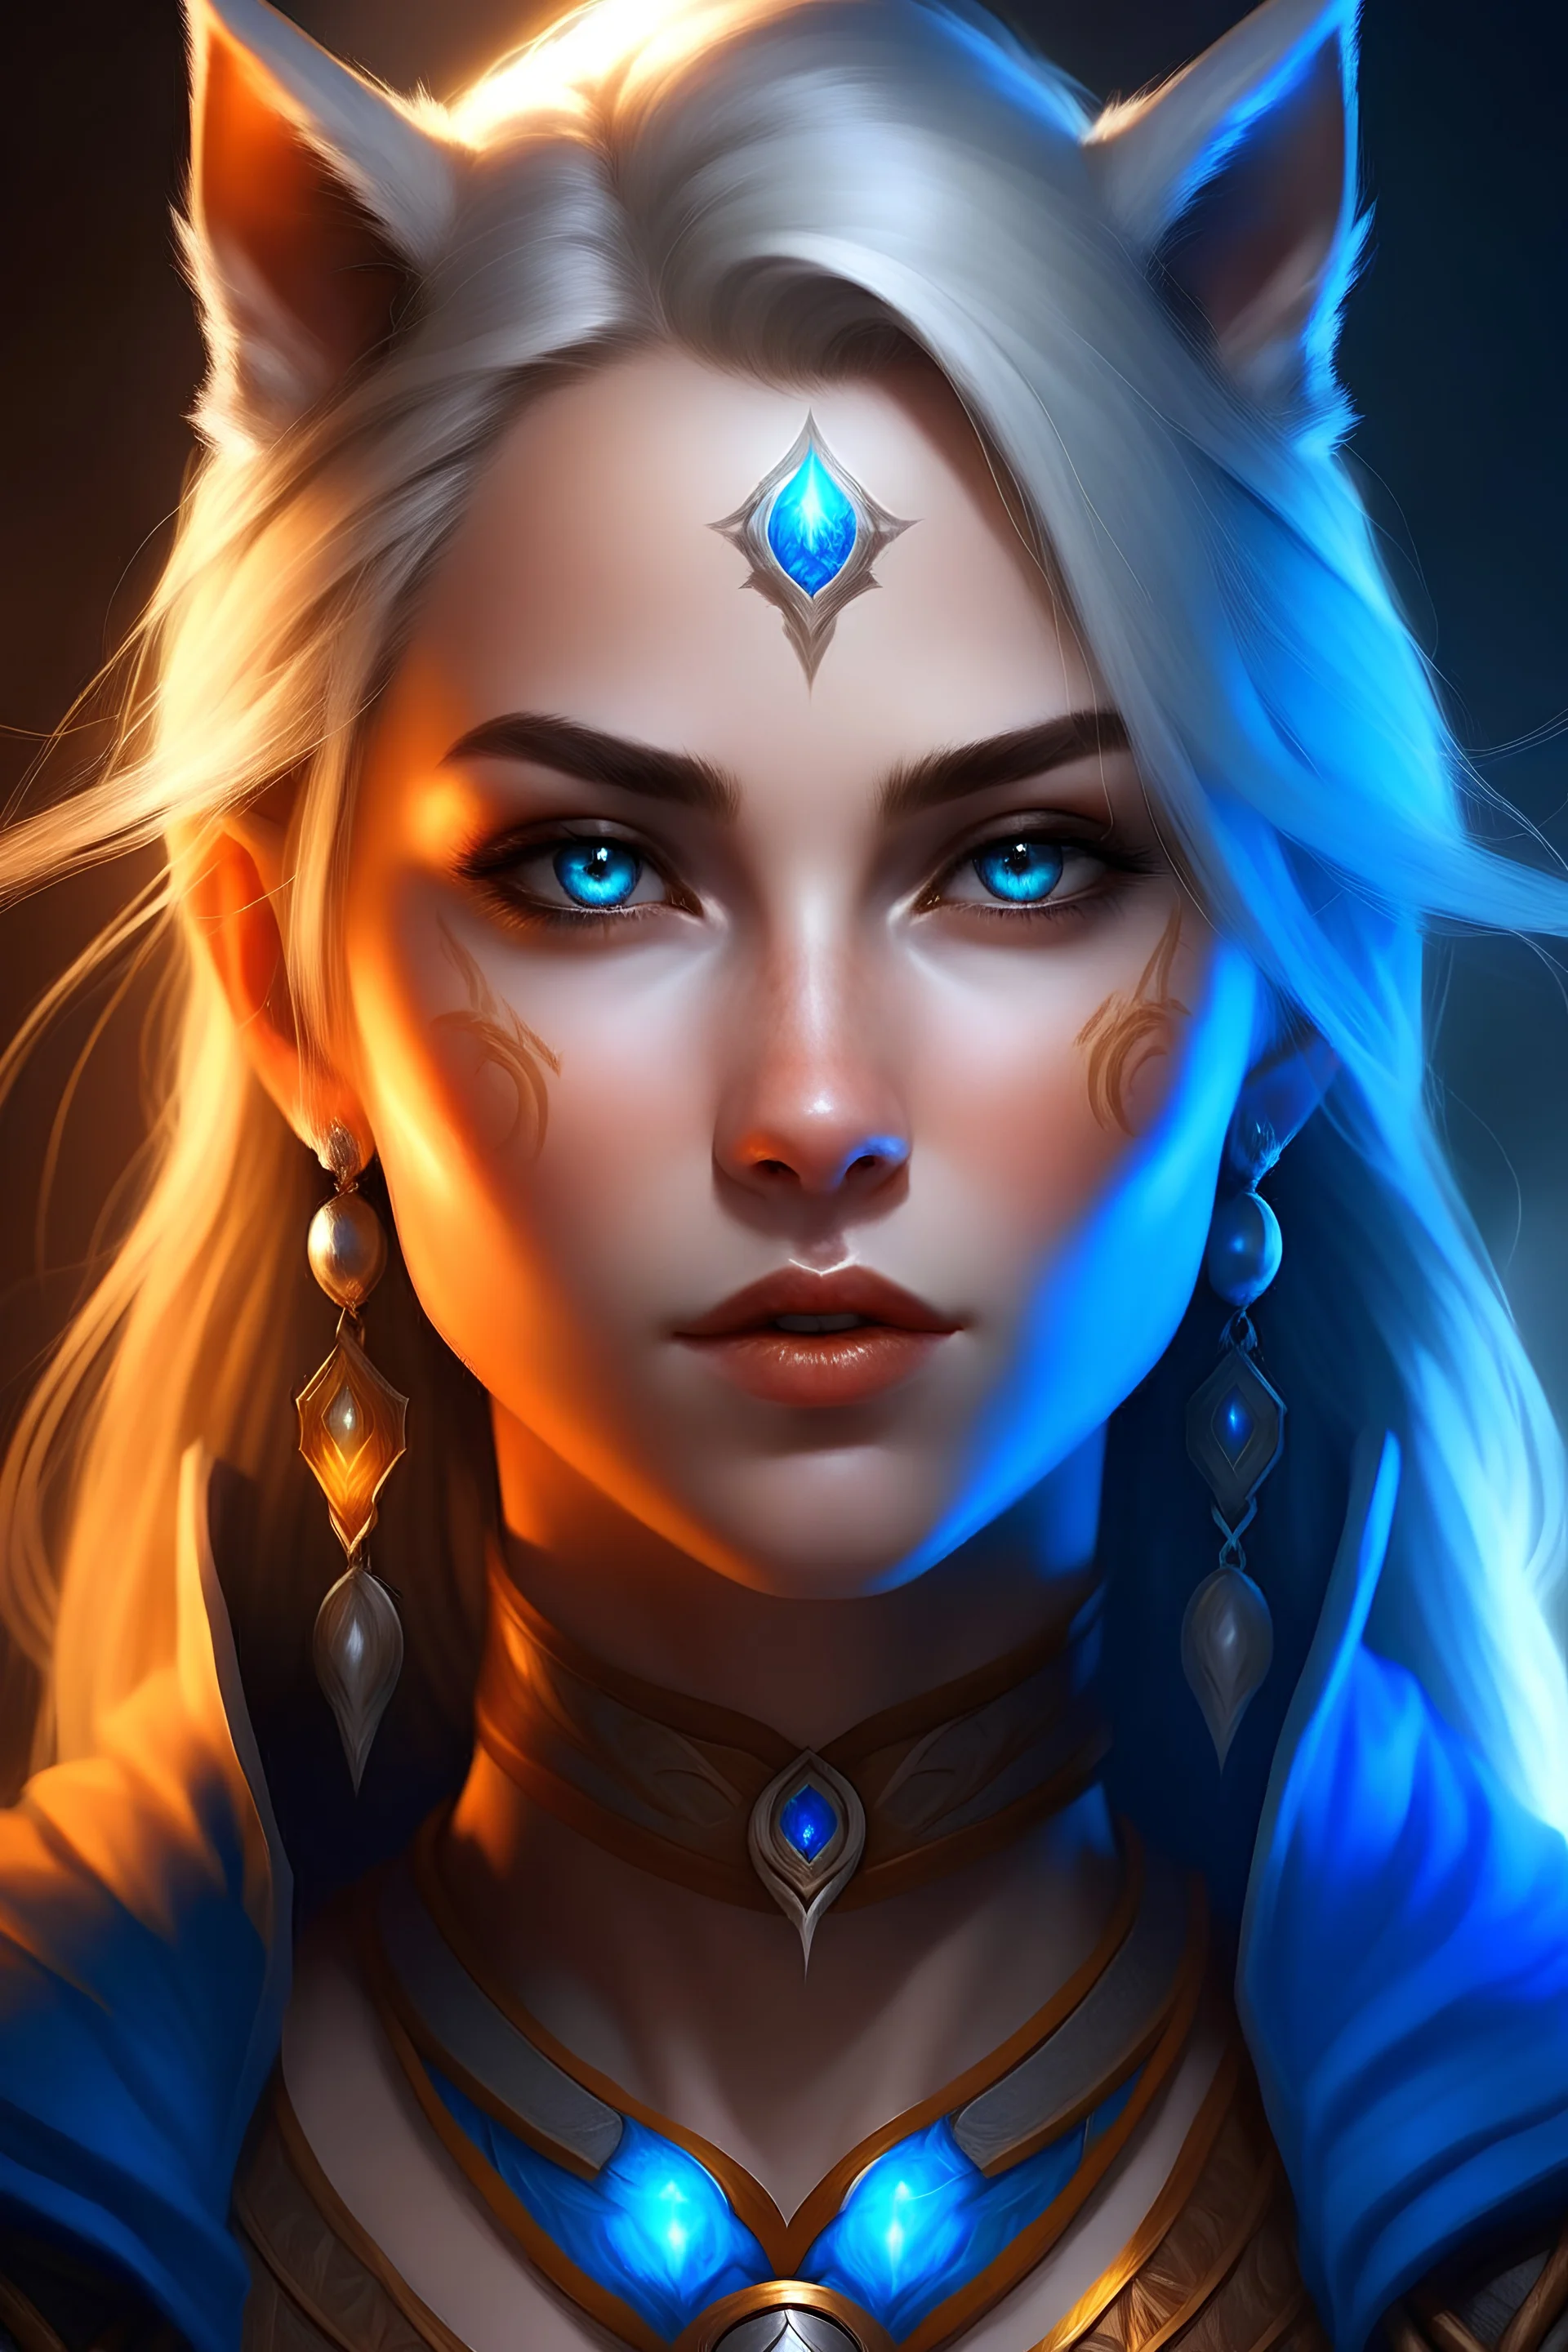 Generate a dungeons and dragons character portrait of the face of a female cleric of selune. Half High Elf blessed by the goddess Selune. She has an auburn wolf cut and piercing blue eyes and is surrounded by holy light